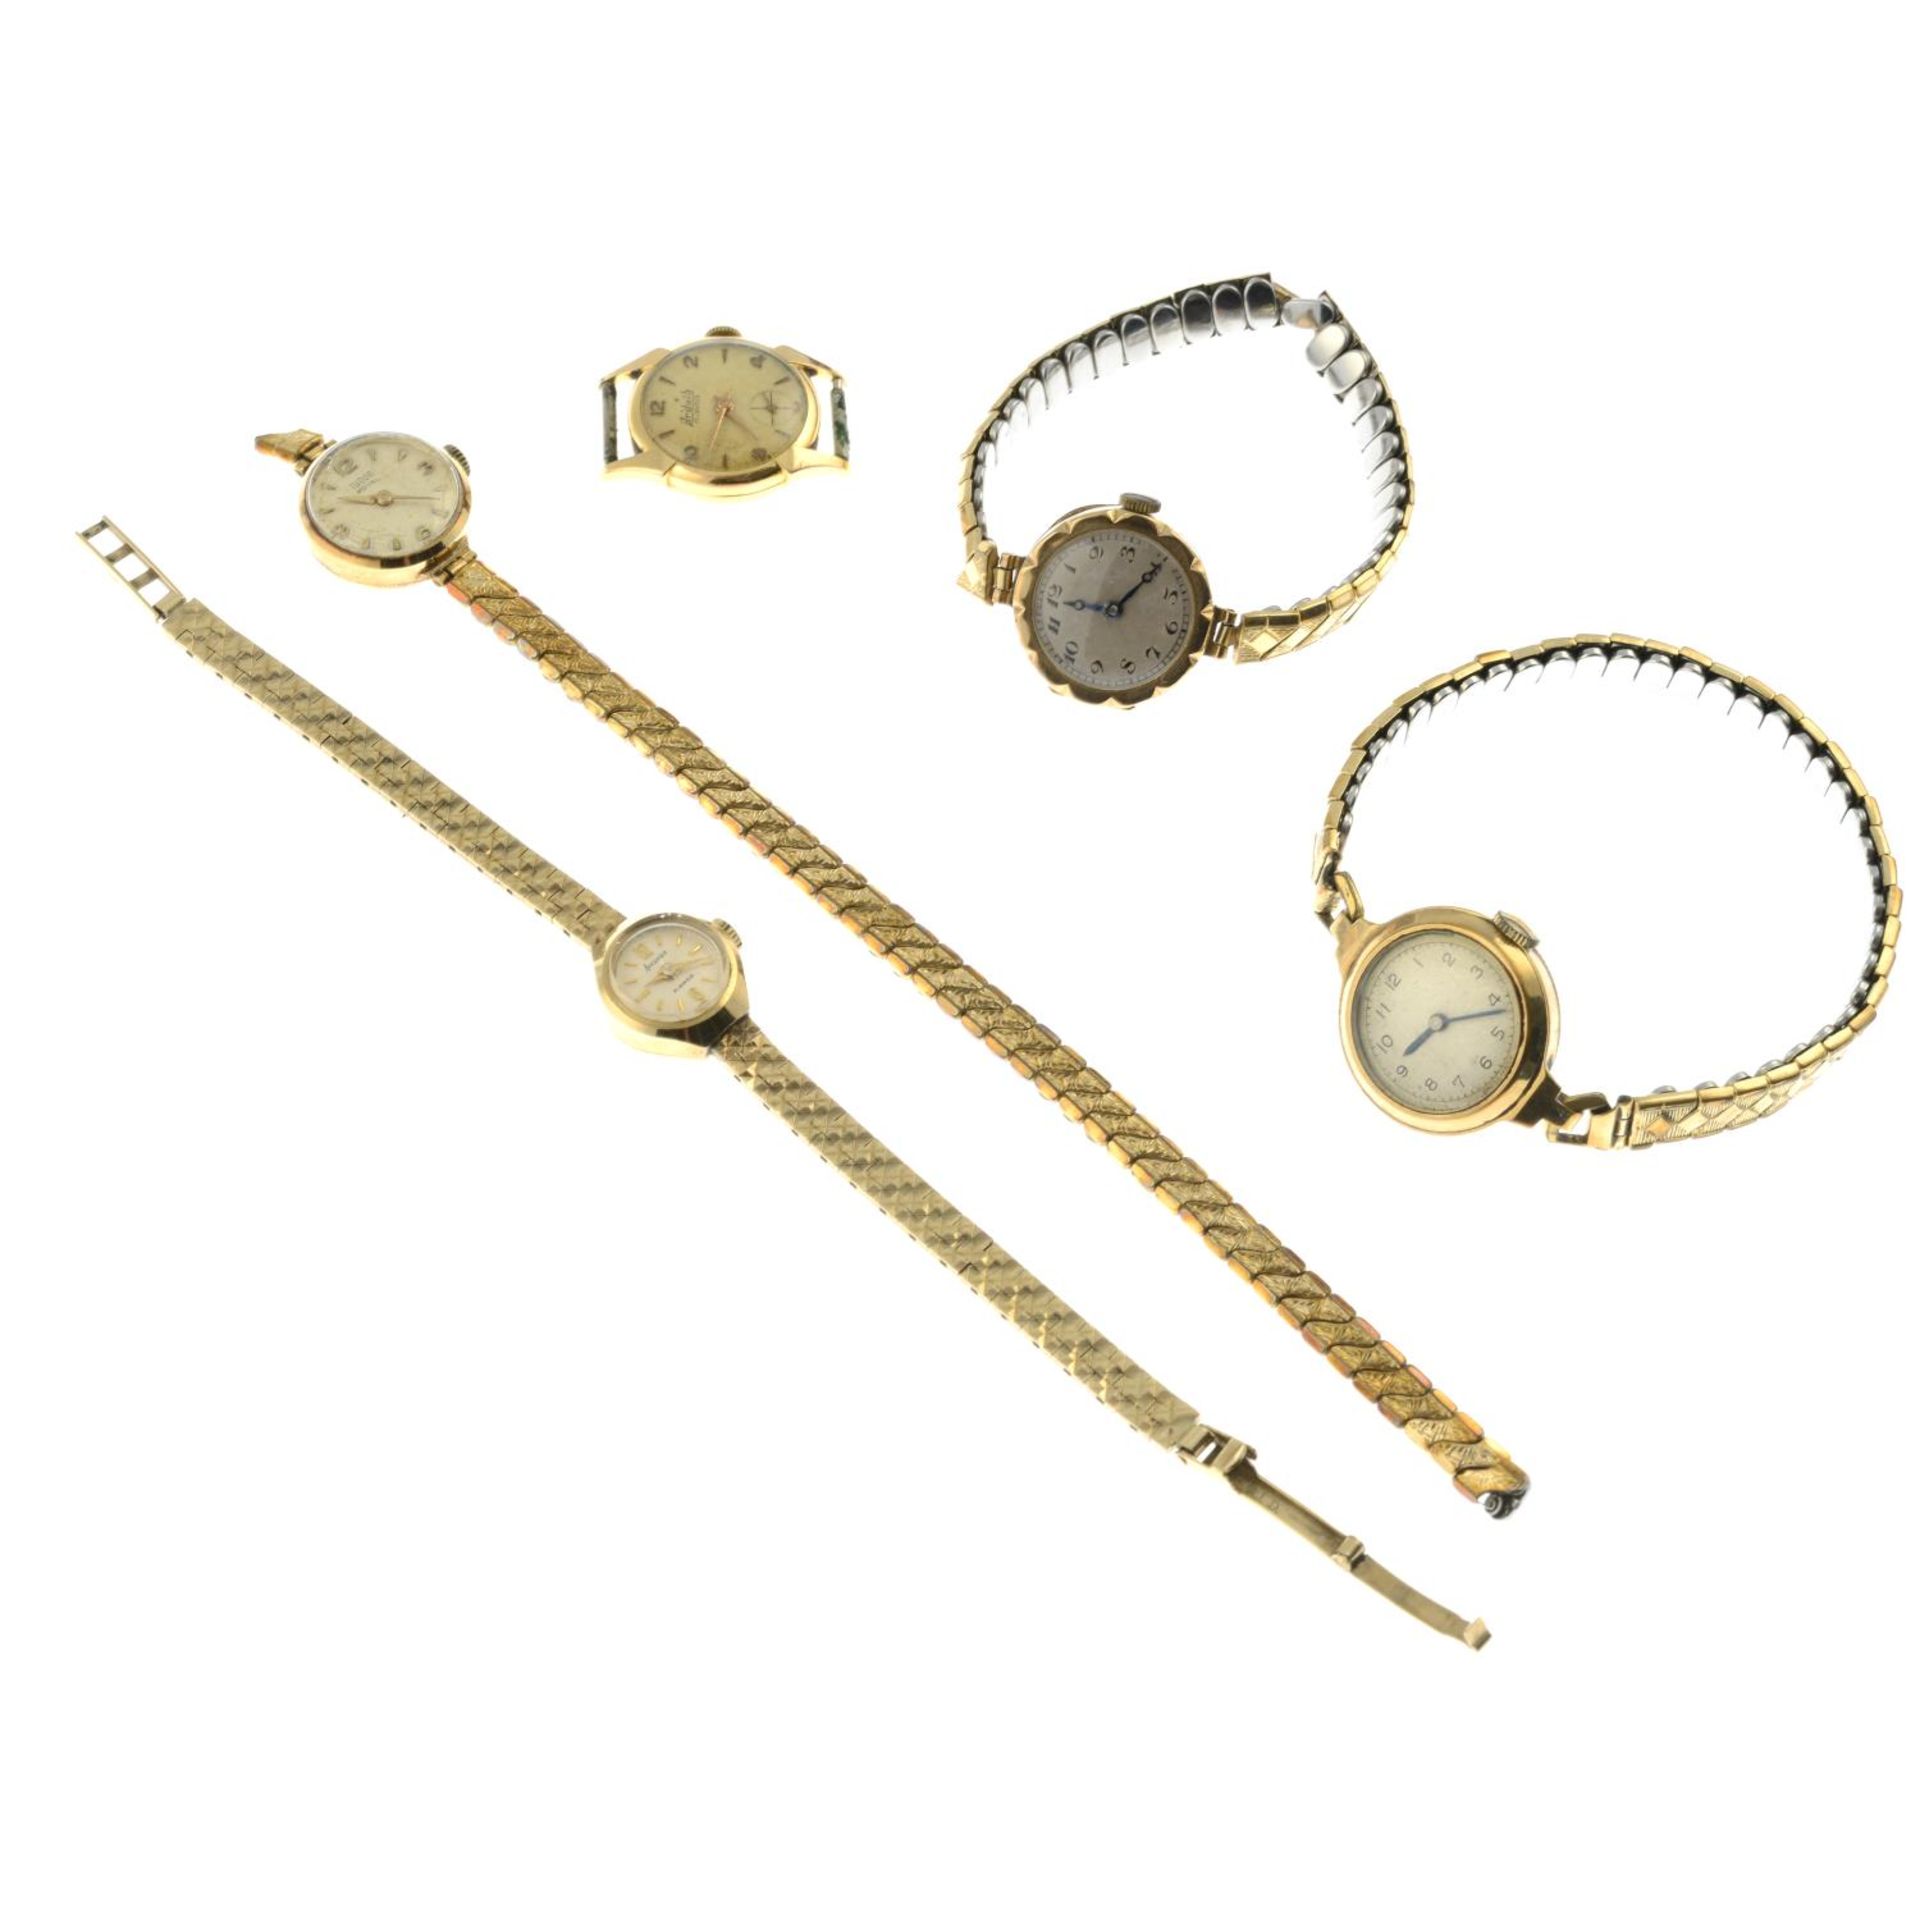 Four lady's wrist watches and a watch head, to include a watch, by Tudor Royal. - Image 2 of 2